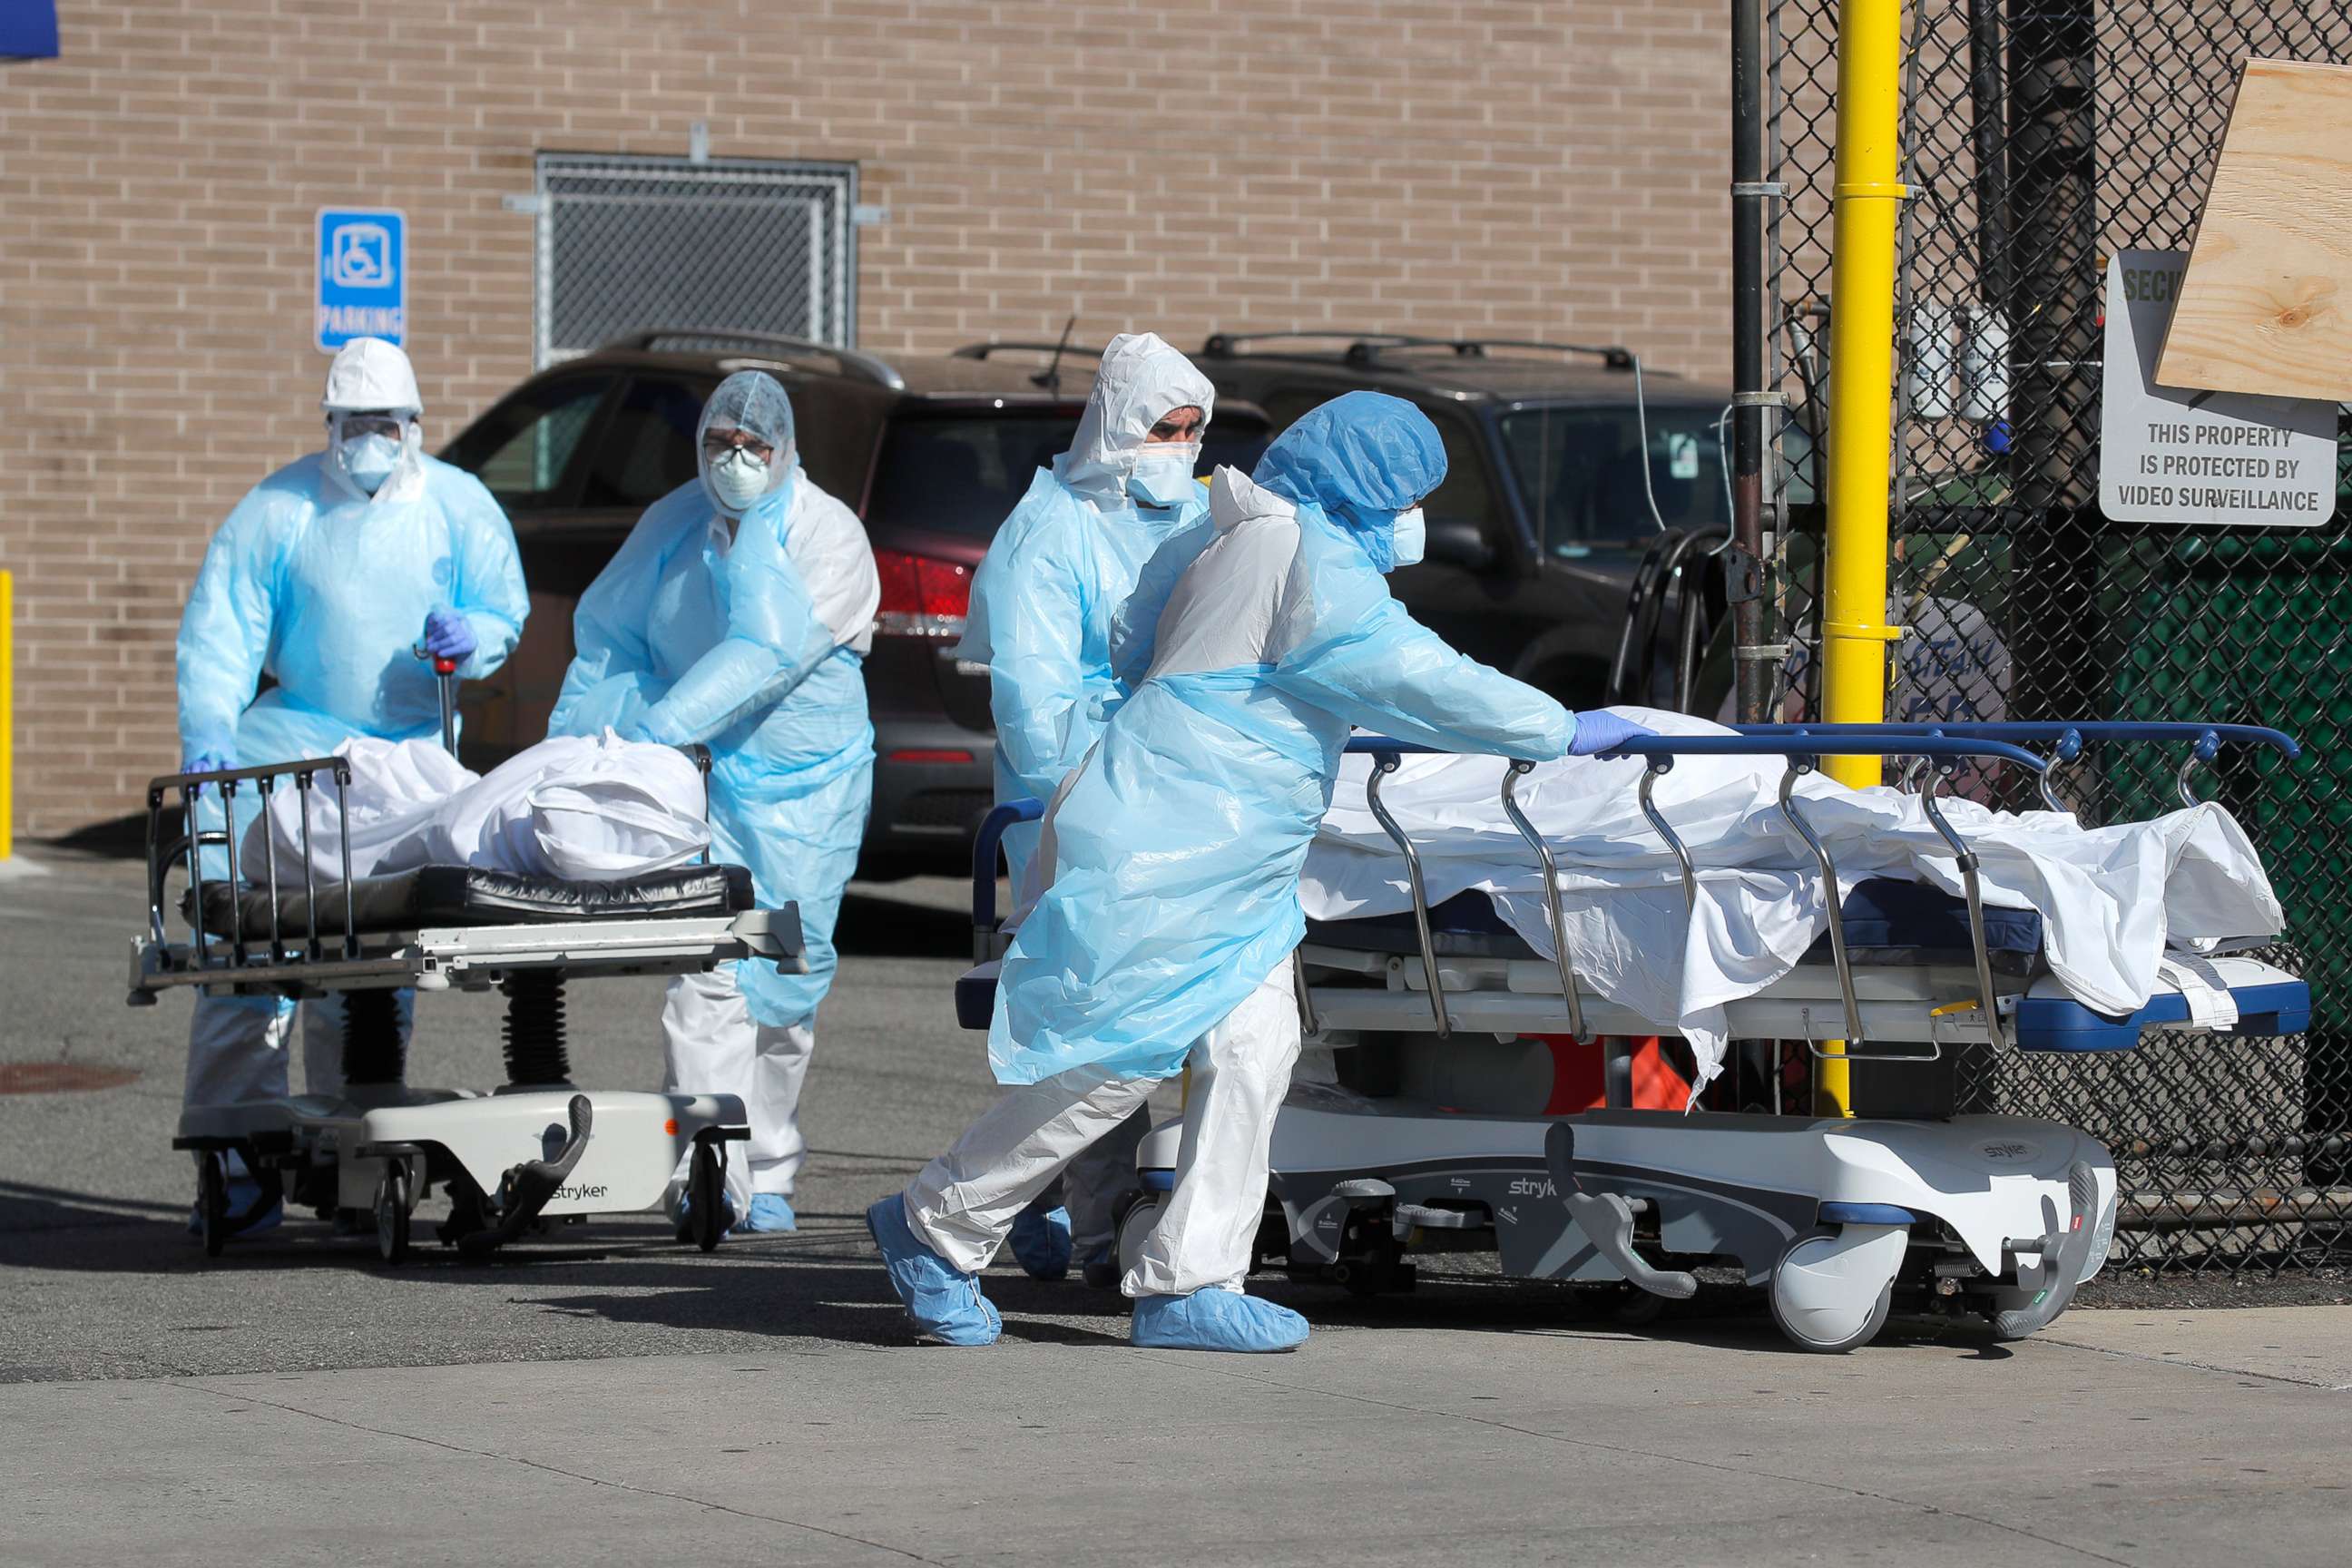 PHOTO: Healthcare workers wheel the bodies of deceased people outside the Wyckoff Heights Medical Center during the outbreak of the coronavirus disease (COVID-19) in Brooklyn, New York, April 6, 2020. 